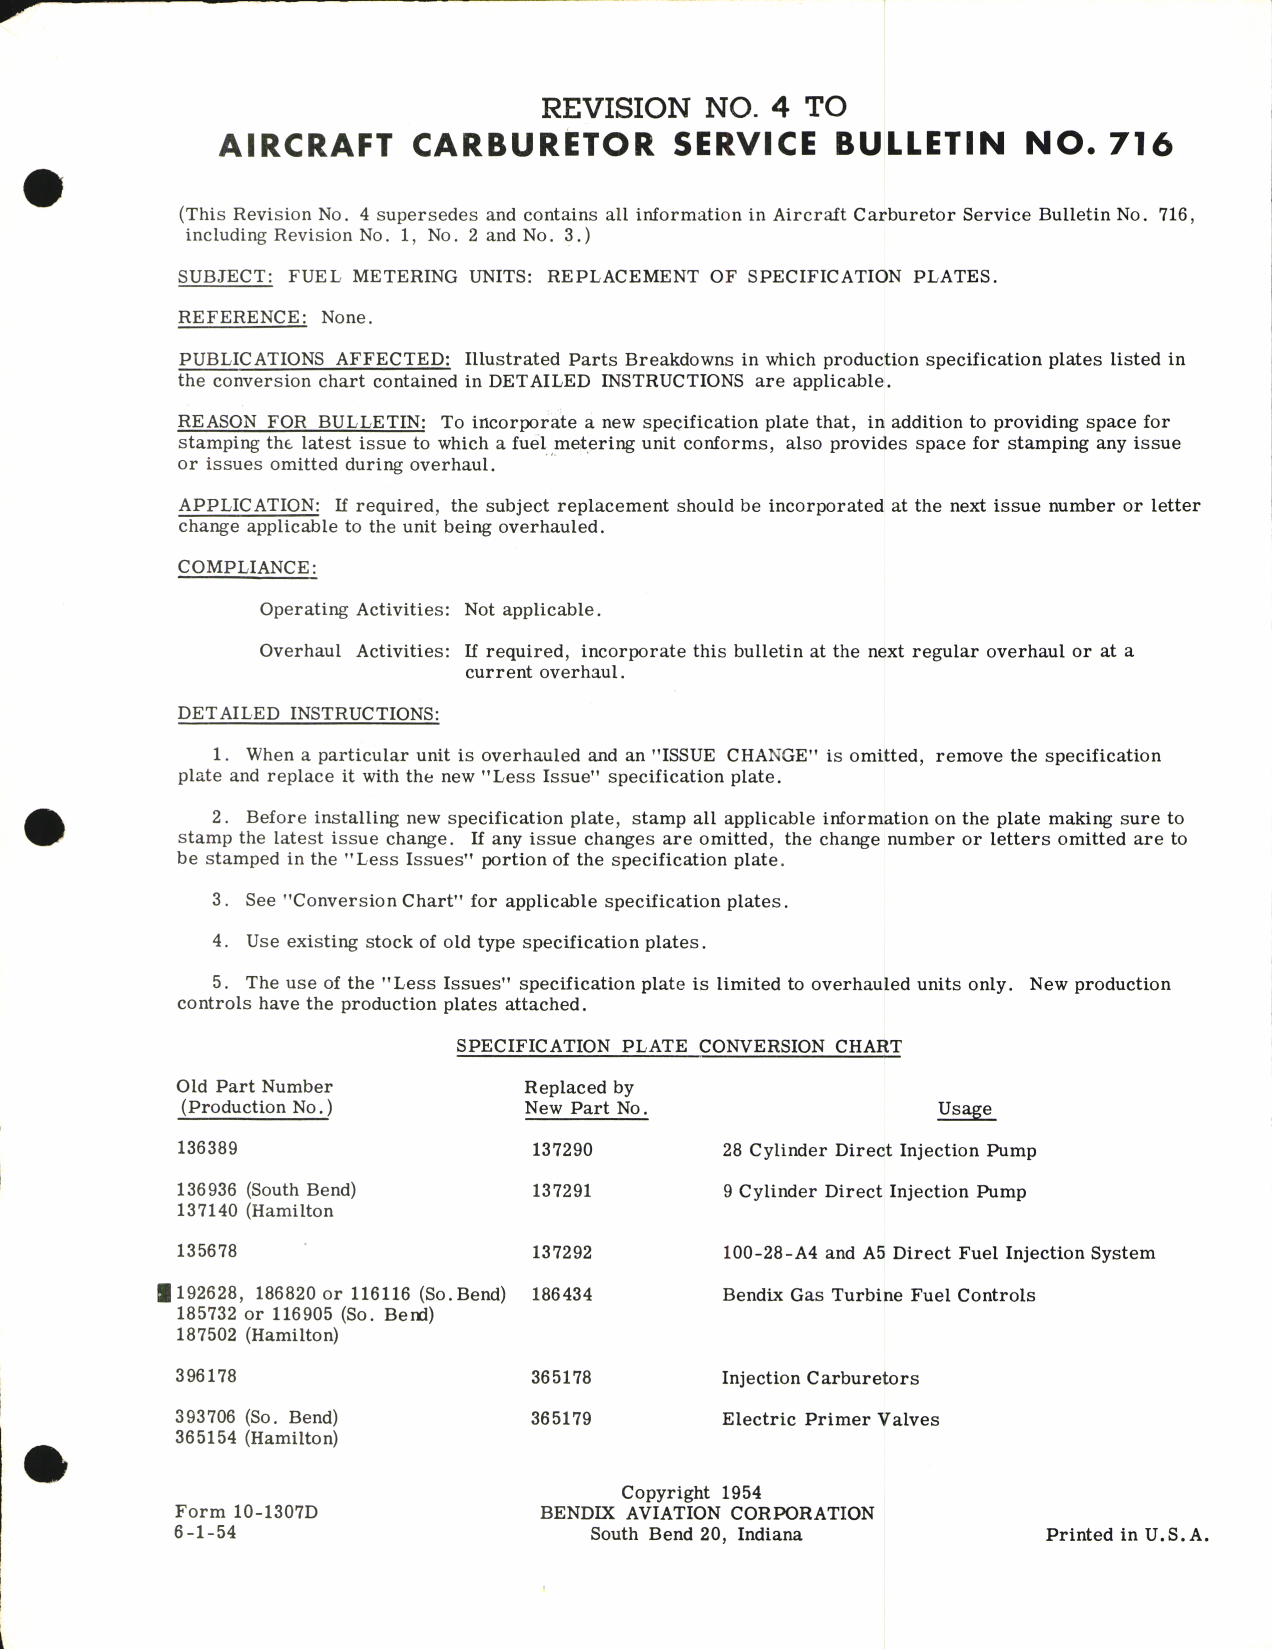 Sample page 1 from AirCorps Library document: Replacement of Specification Plates on Fuel Metering Units